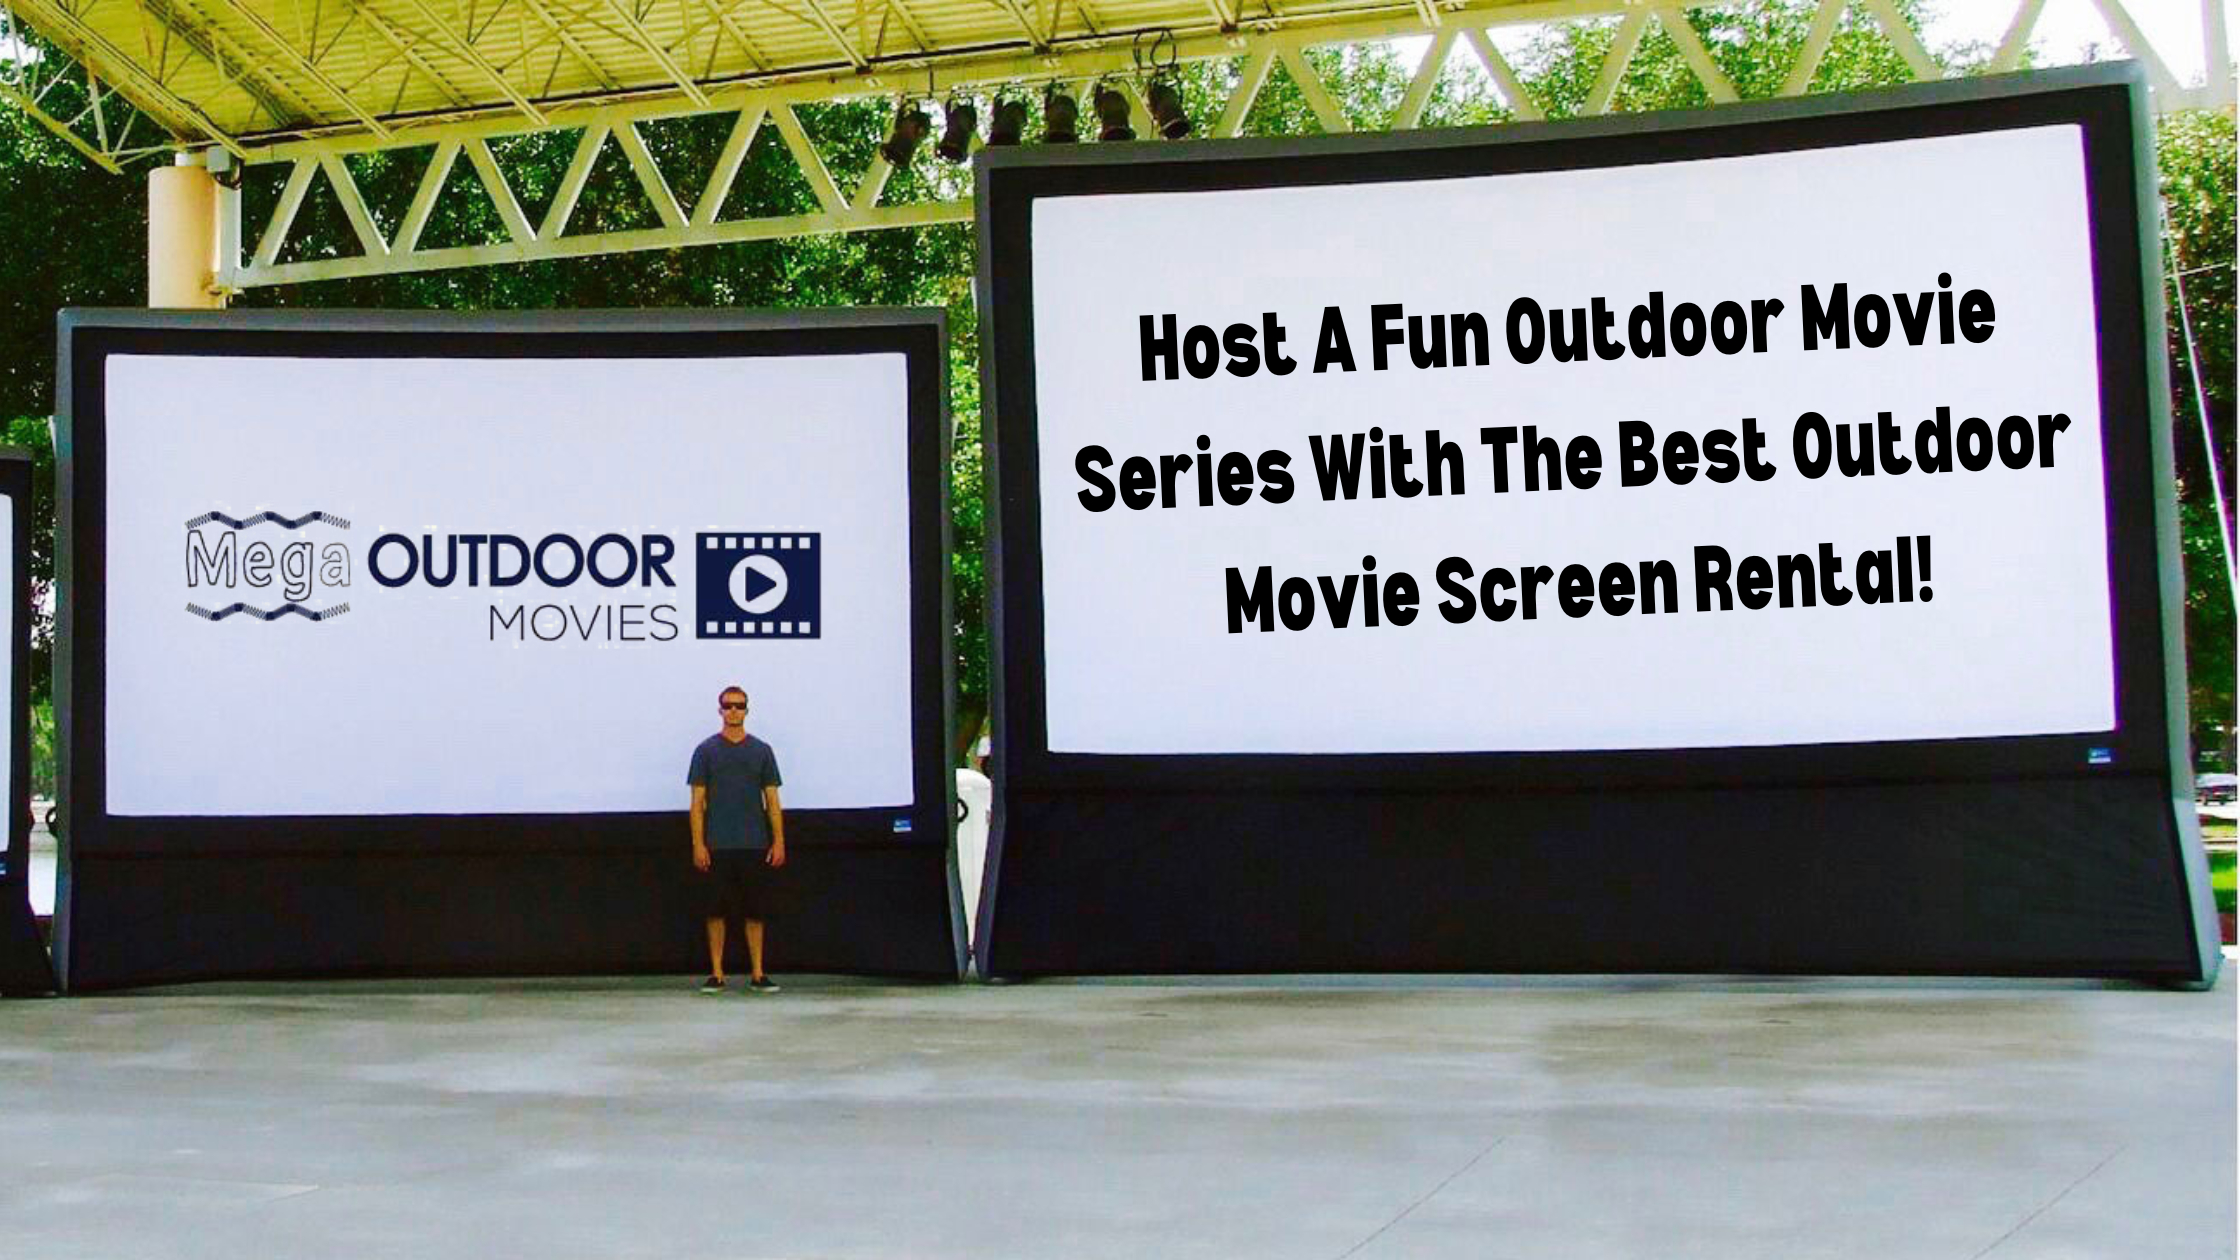 Host A Fun Outdoor Movie Series With The Best Outdoor Movie Screen Rental!